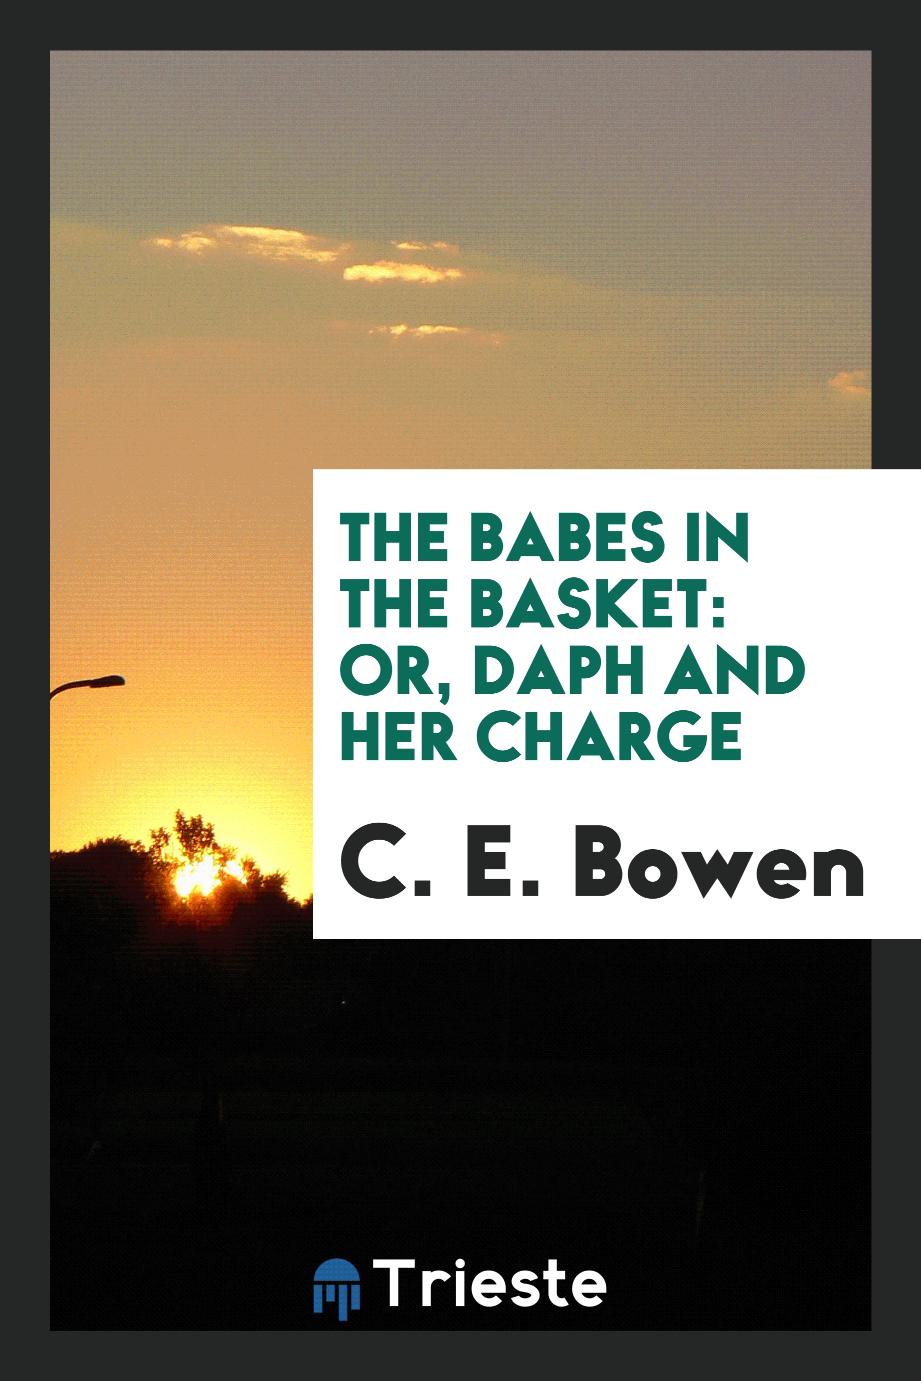 The Babes in the basket: or, Daph and her charge